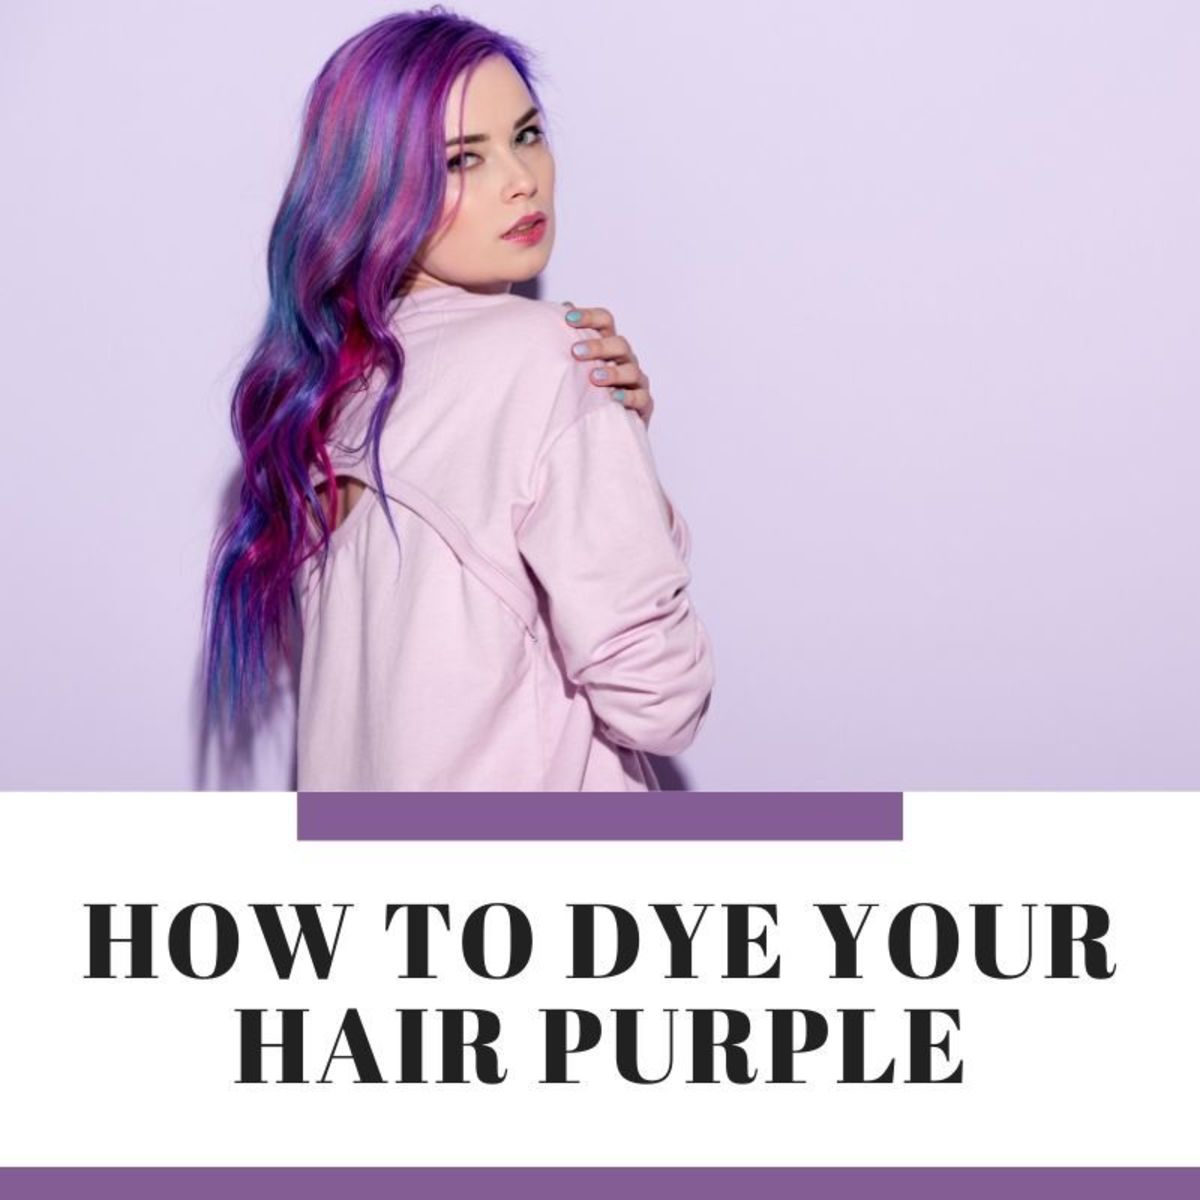 How to Dye Your Hair Purple